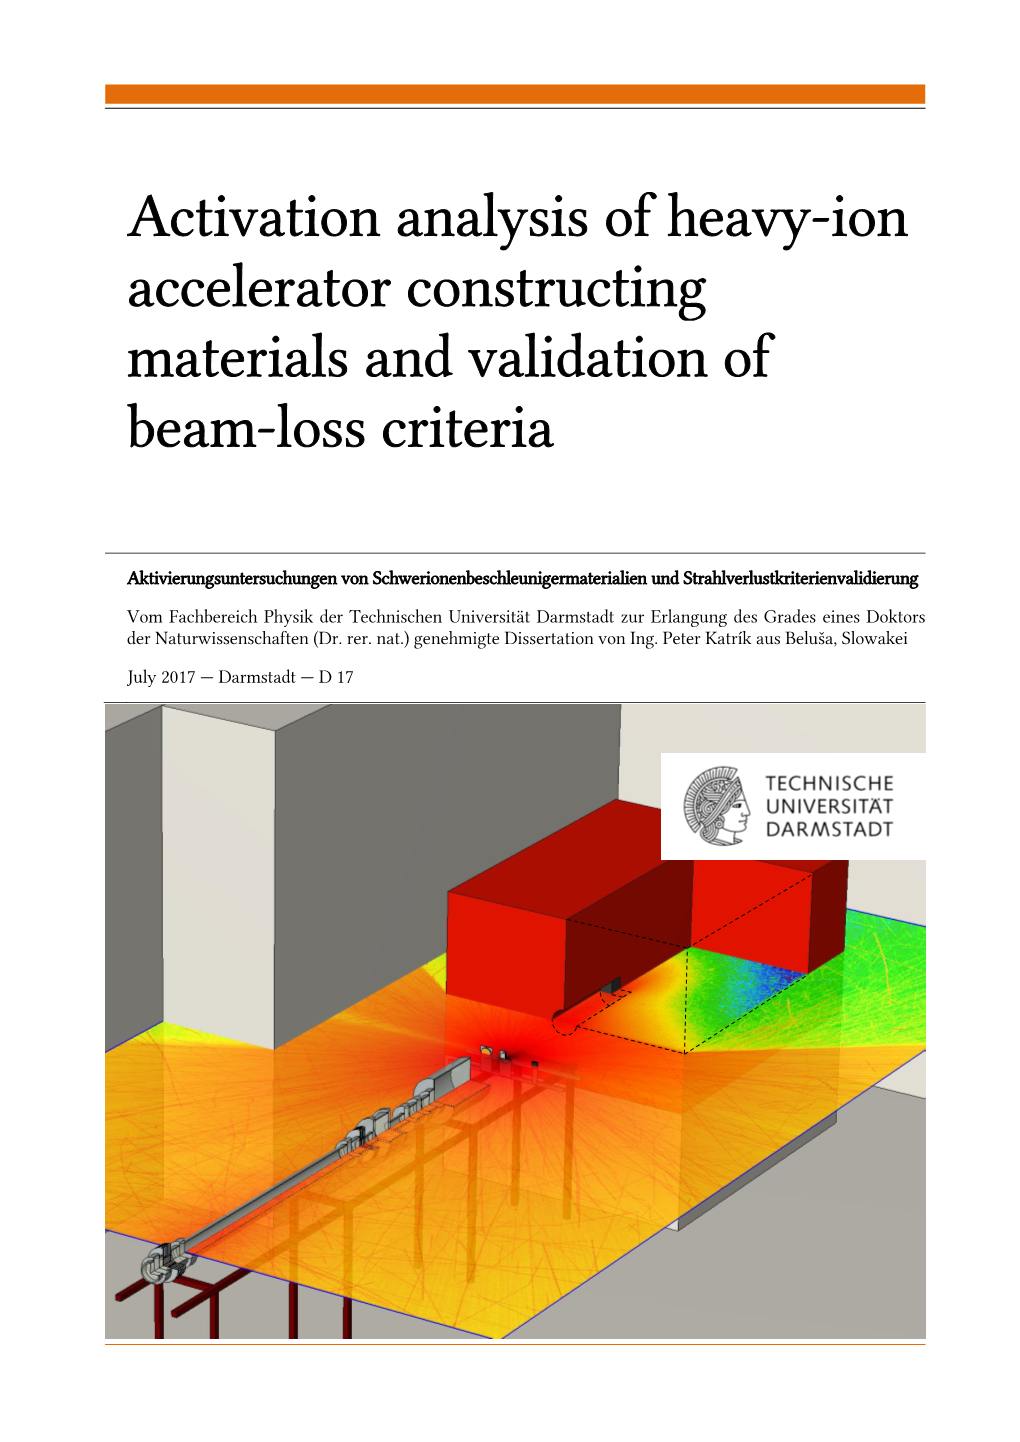 Activation Analysis of Heavy-Ion Accelerator Constructing Materials and Validation of Beam-Loss Criteria